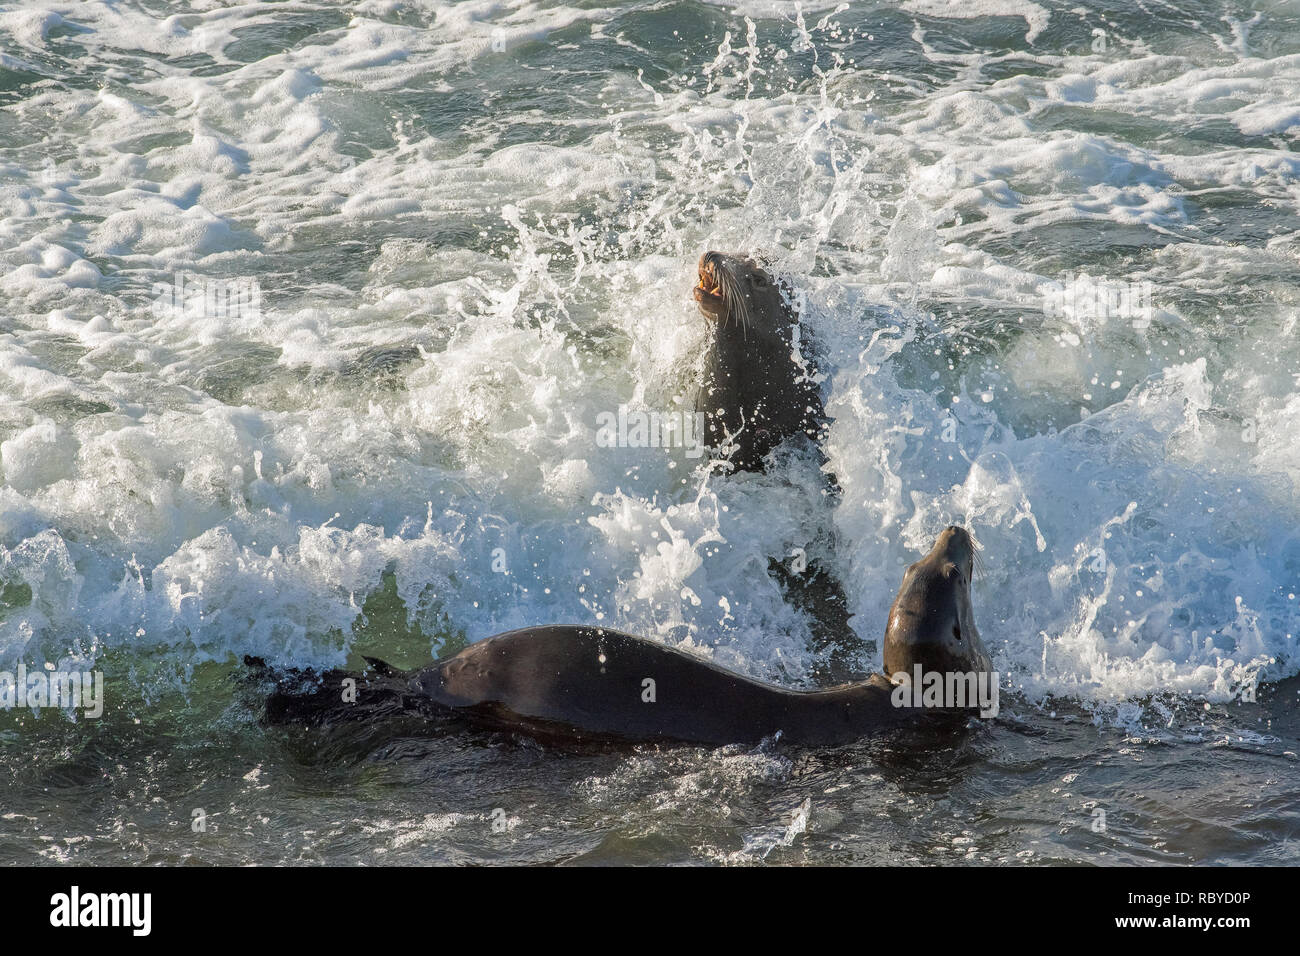 California Sea Lions Caught in Incoming Waves while Playing in the Surf Stock Photo